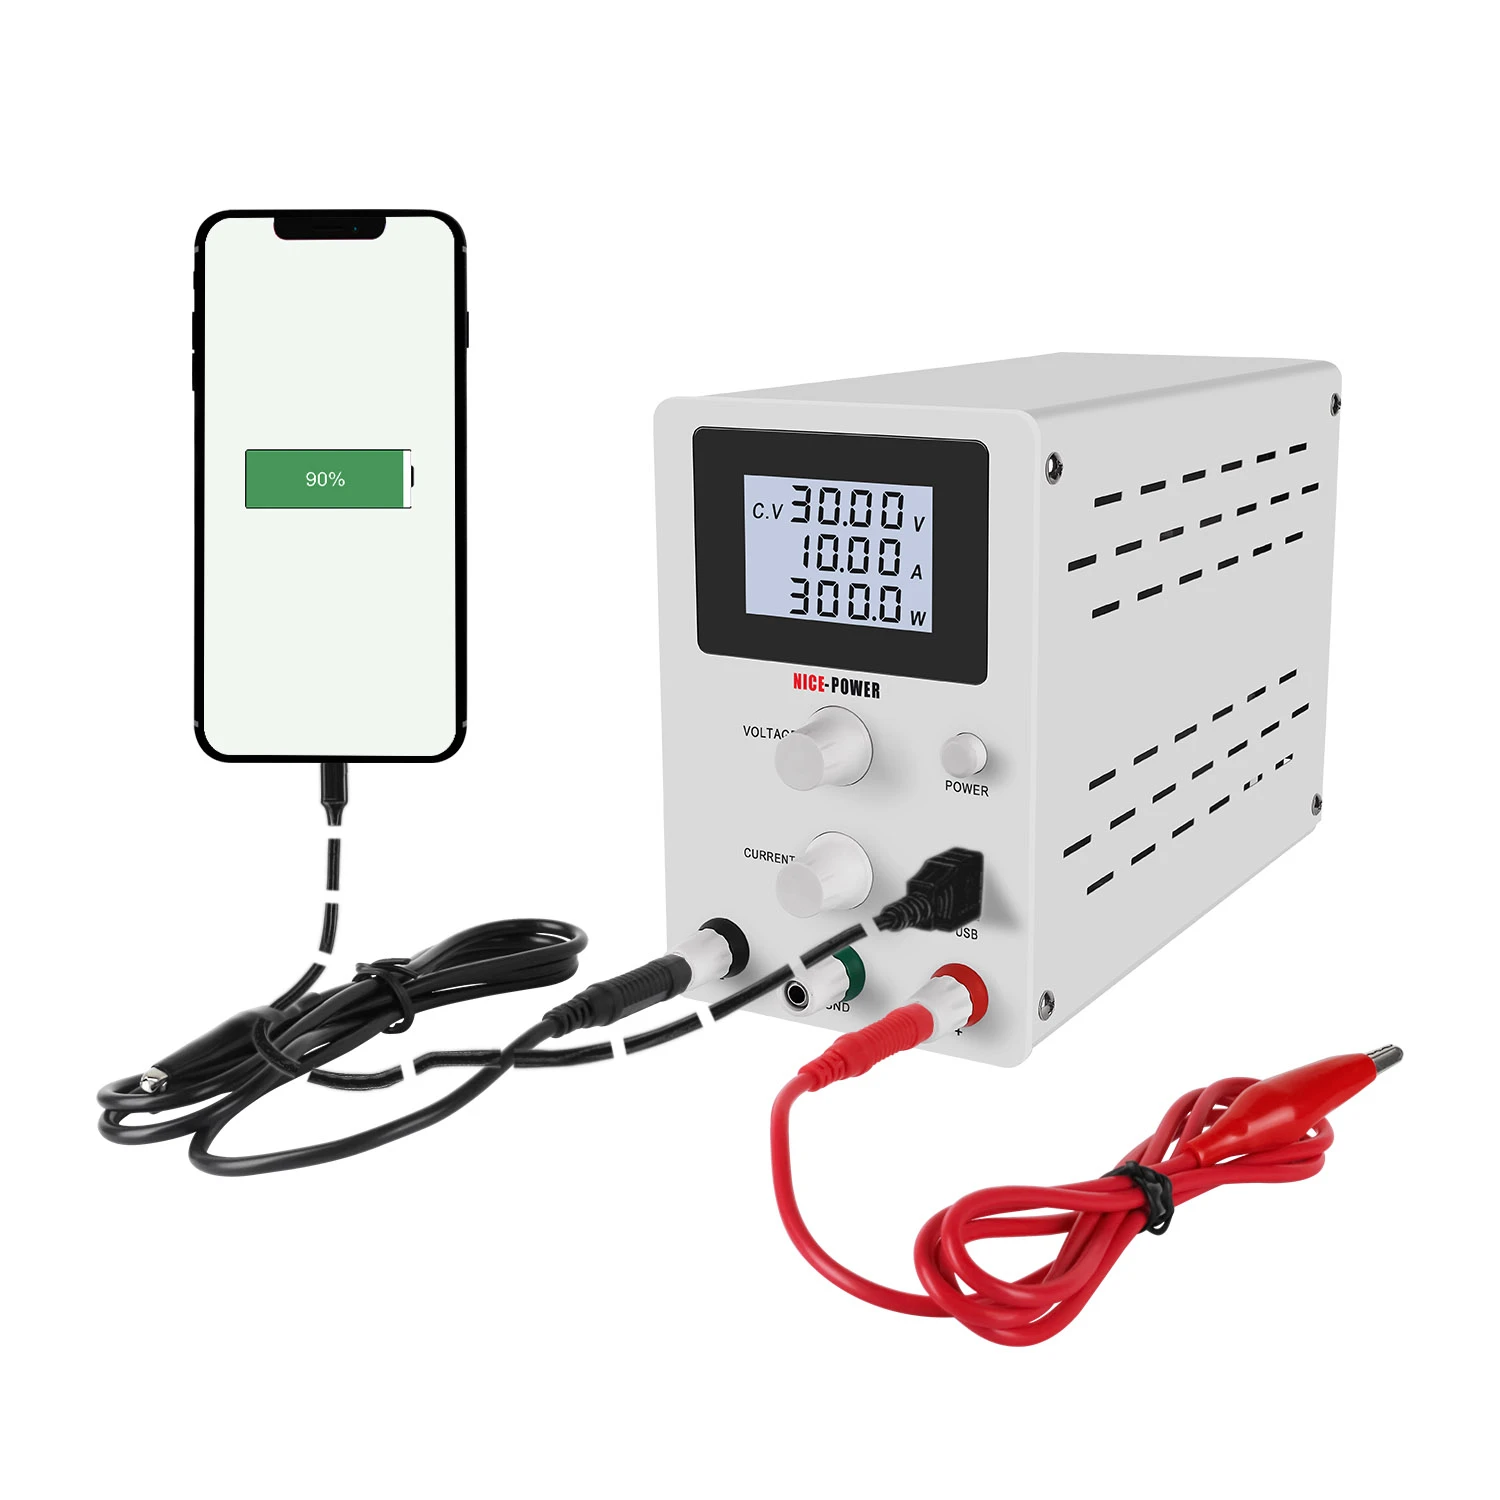 R-SPS3010D DC Regulated Power Supply 30V 10A Adjustable Switching Variable Power Source for Mobile Phone Repairing